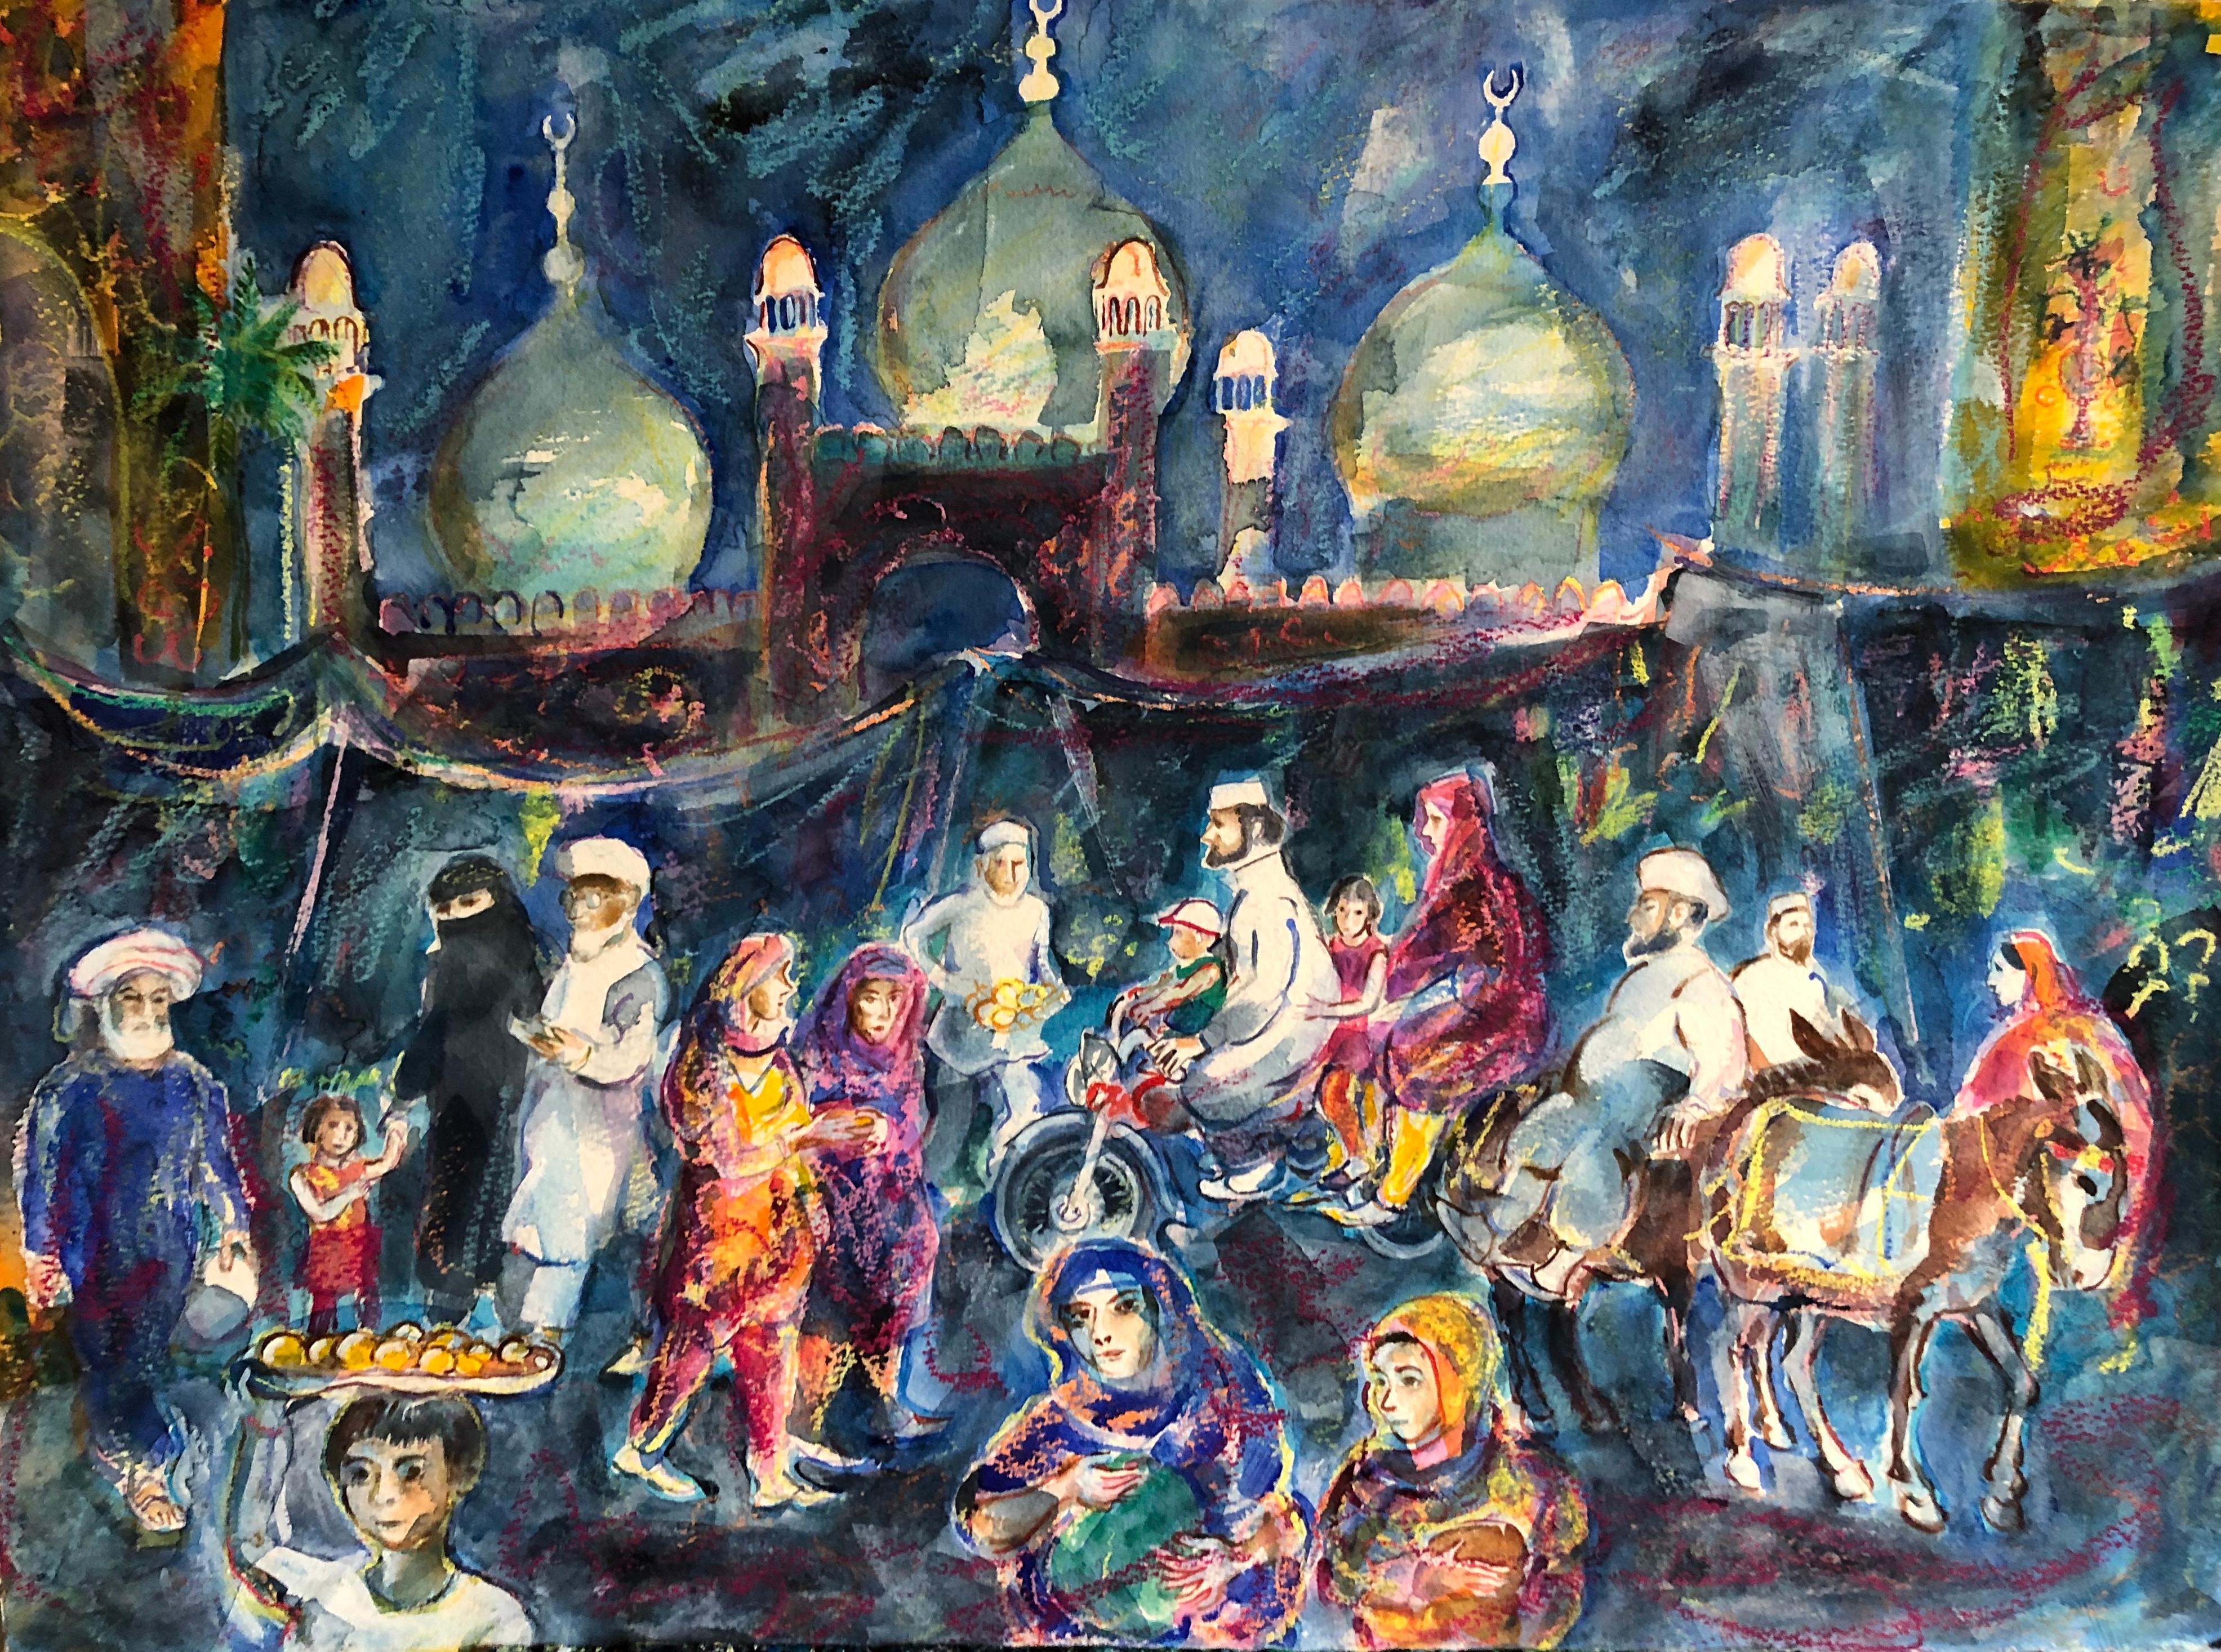 "Lahore Night market". Contemporary Figurative Watercolour Painting